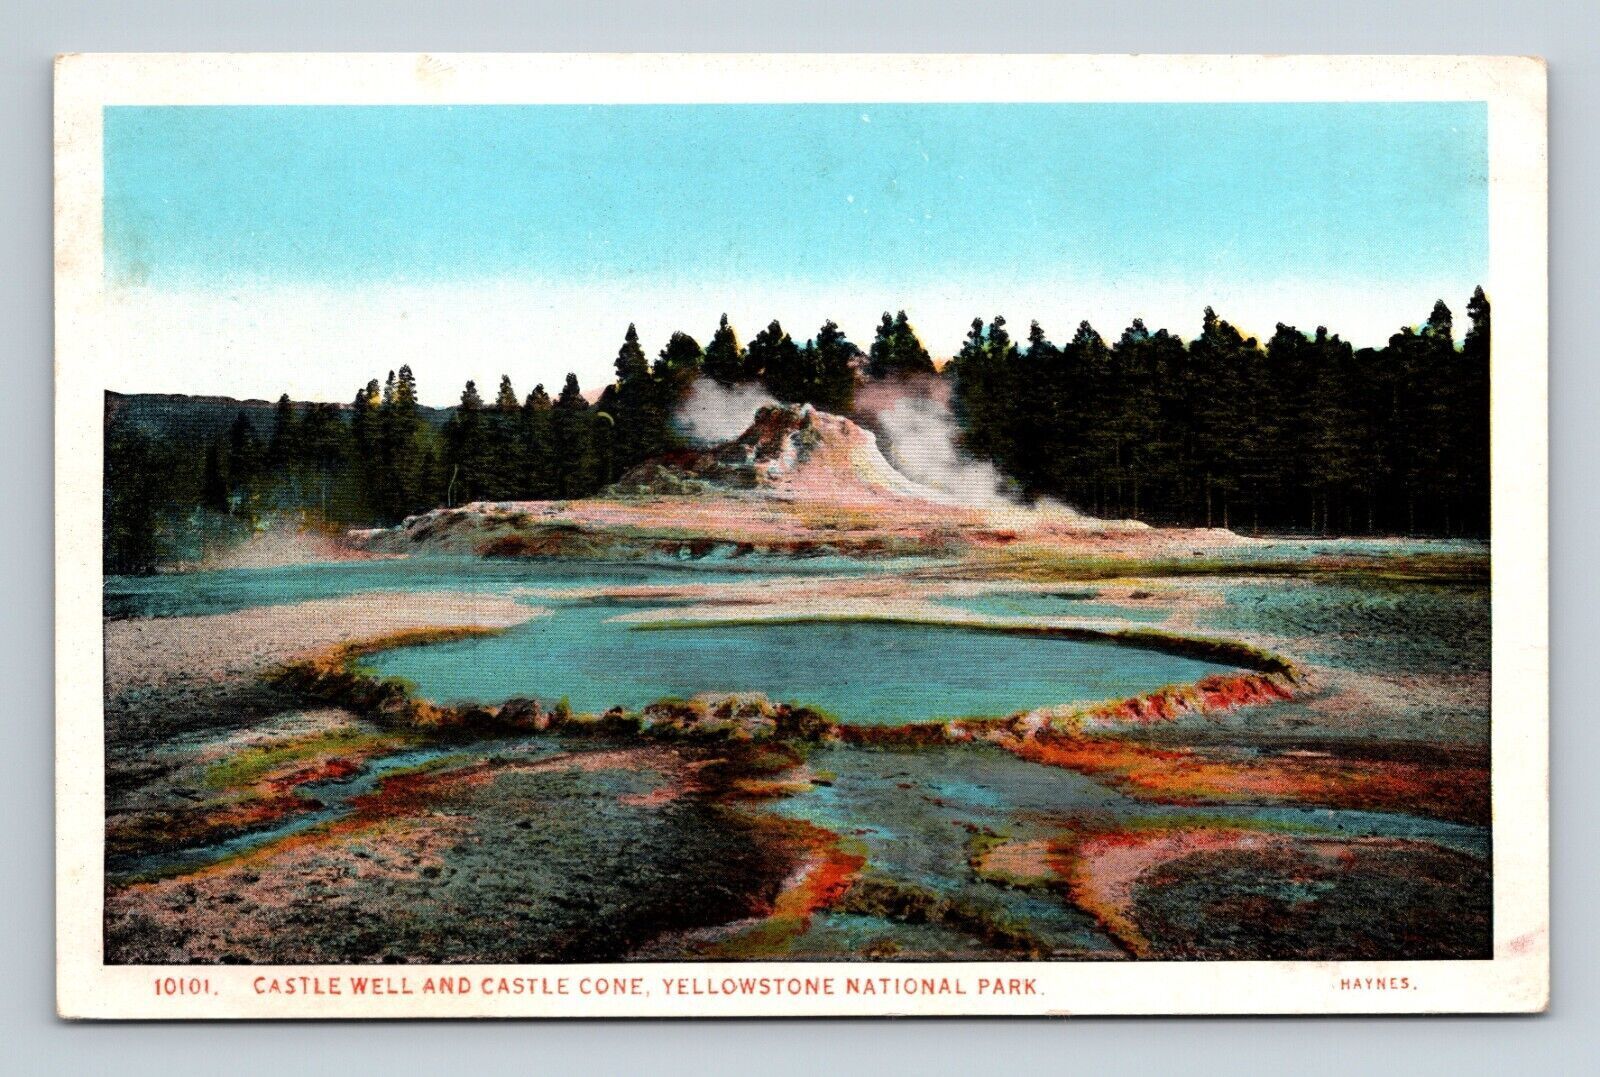 Castle Well Castle Cone Yellowstone National Park Haynes Photo 10101 Postcard